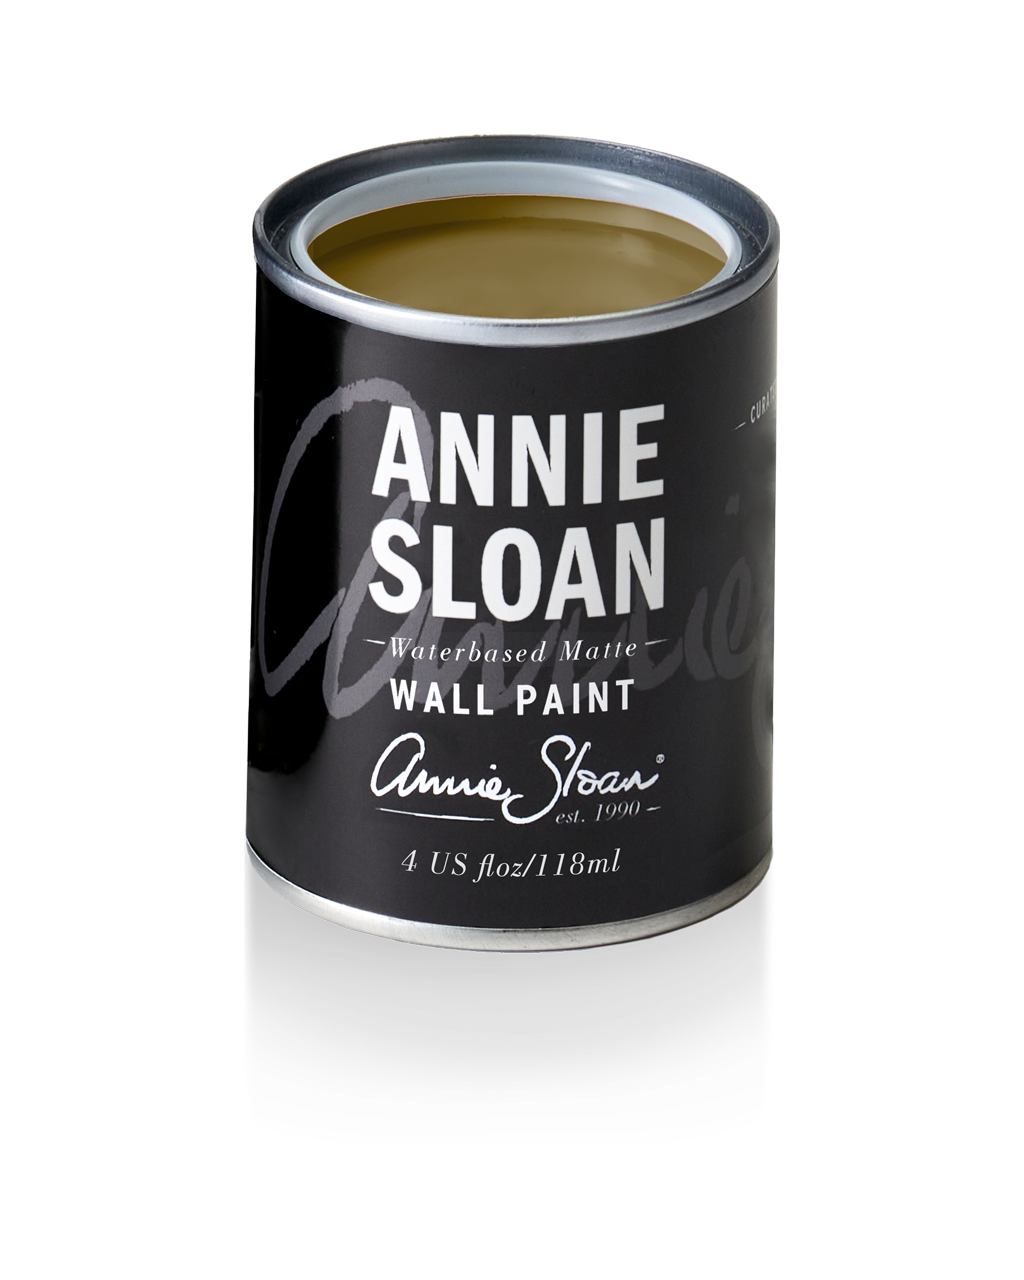 Annie Sloan Wall Paint Tin Olive